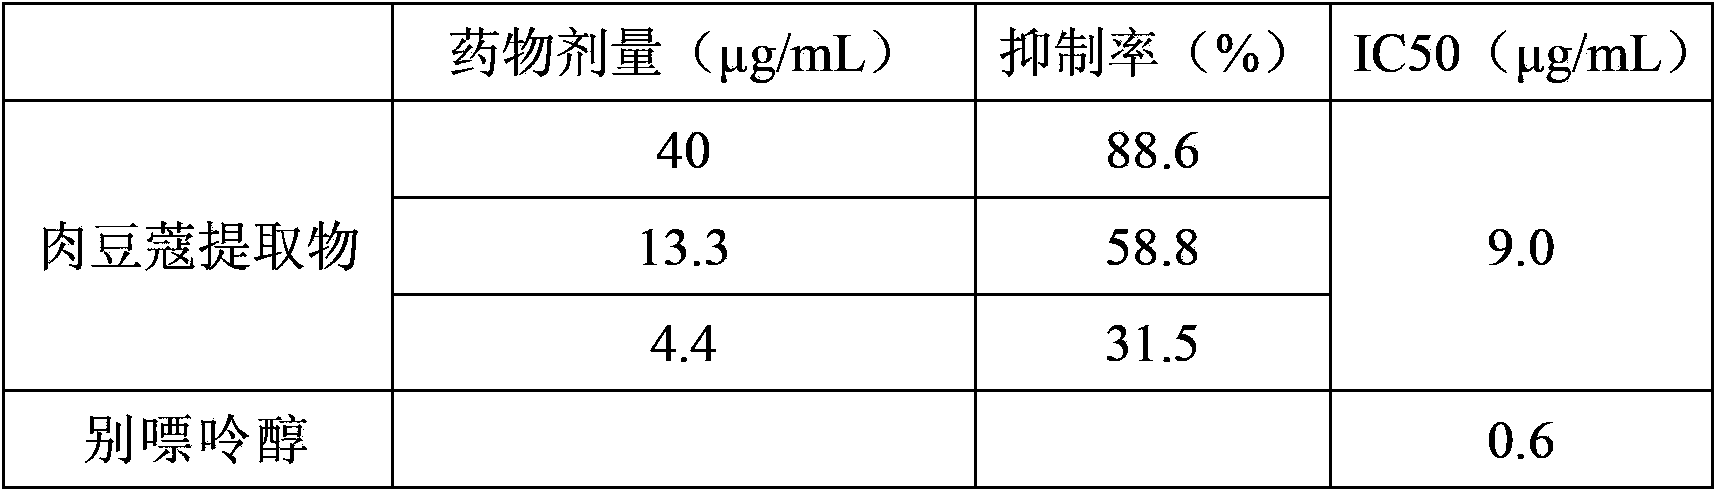 Application of nutmeg extract